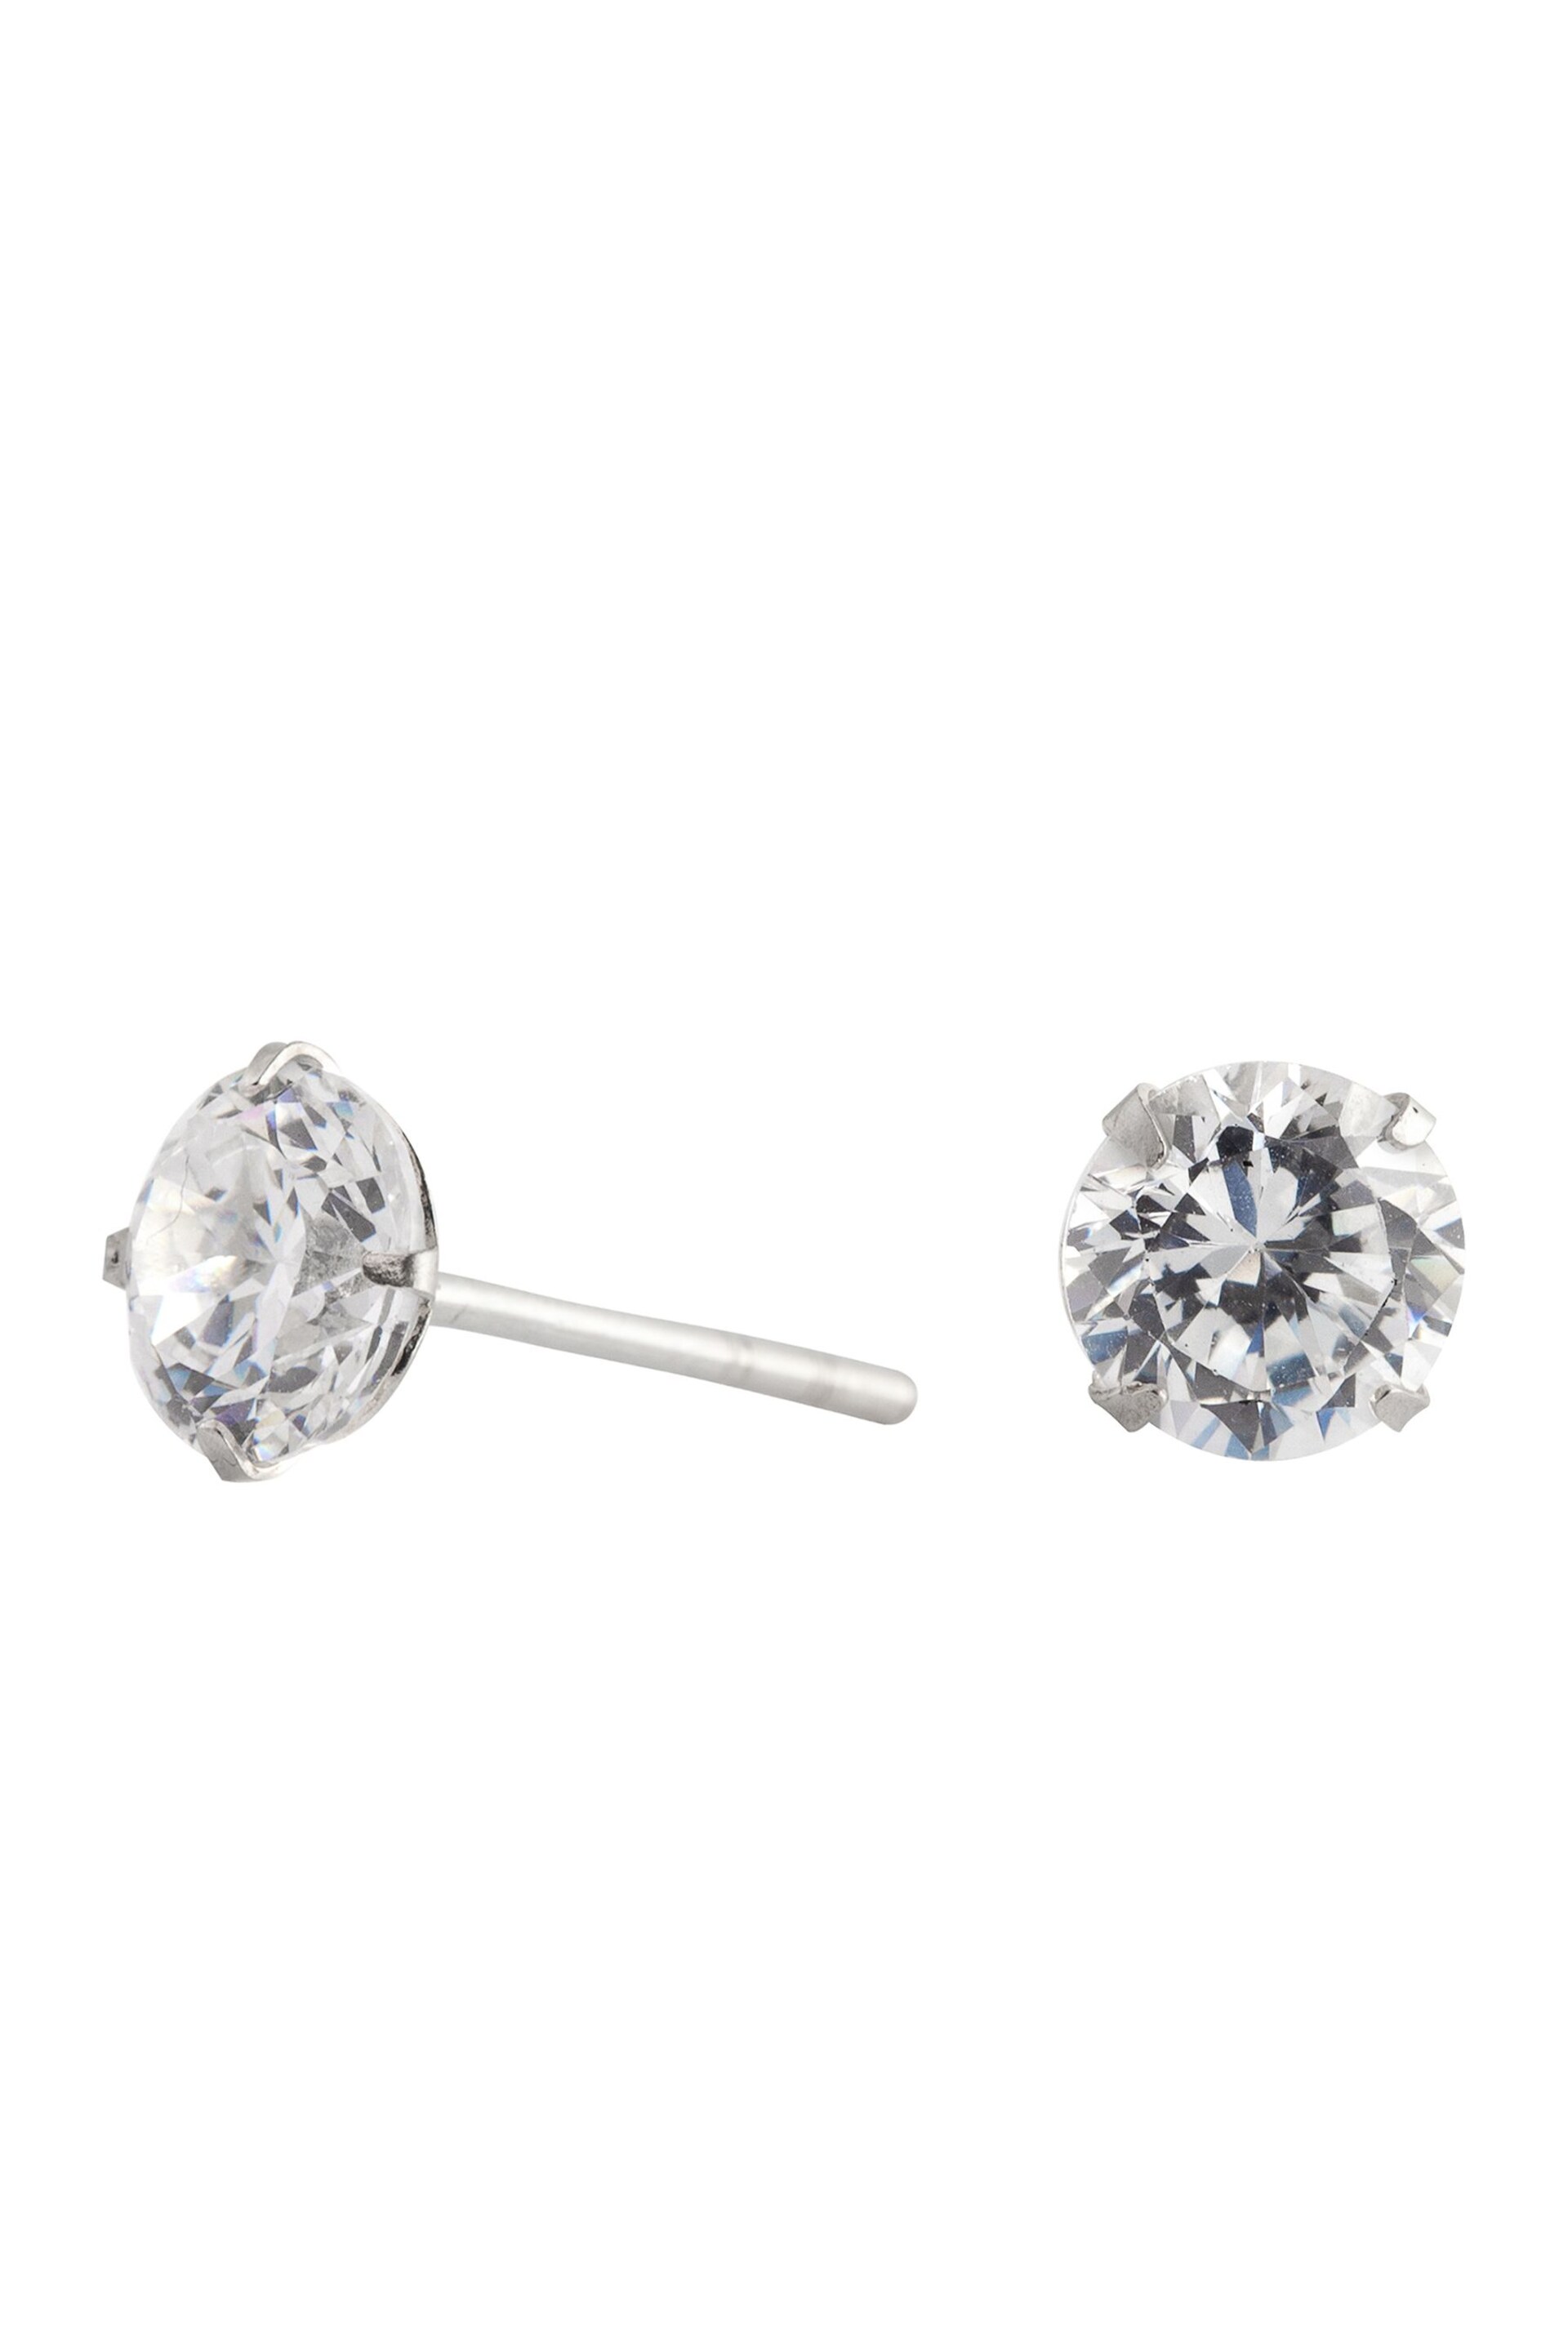 Simply Silver Silver Tone 925 6mm Round Cubic Zirconia Stud Earrings - Image 1 of 2